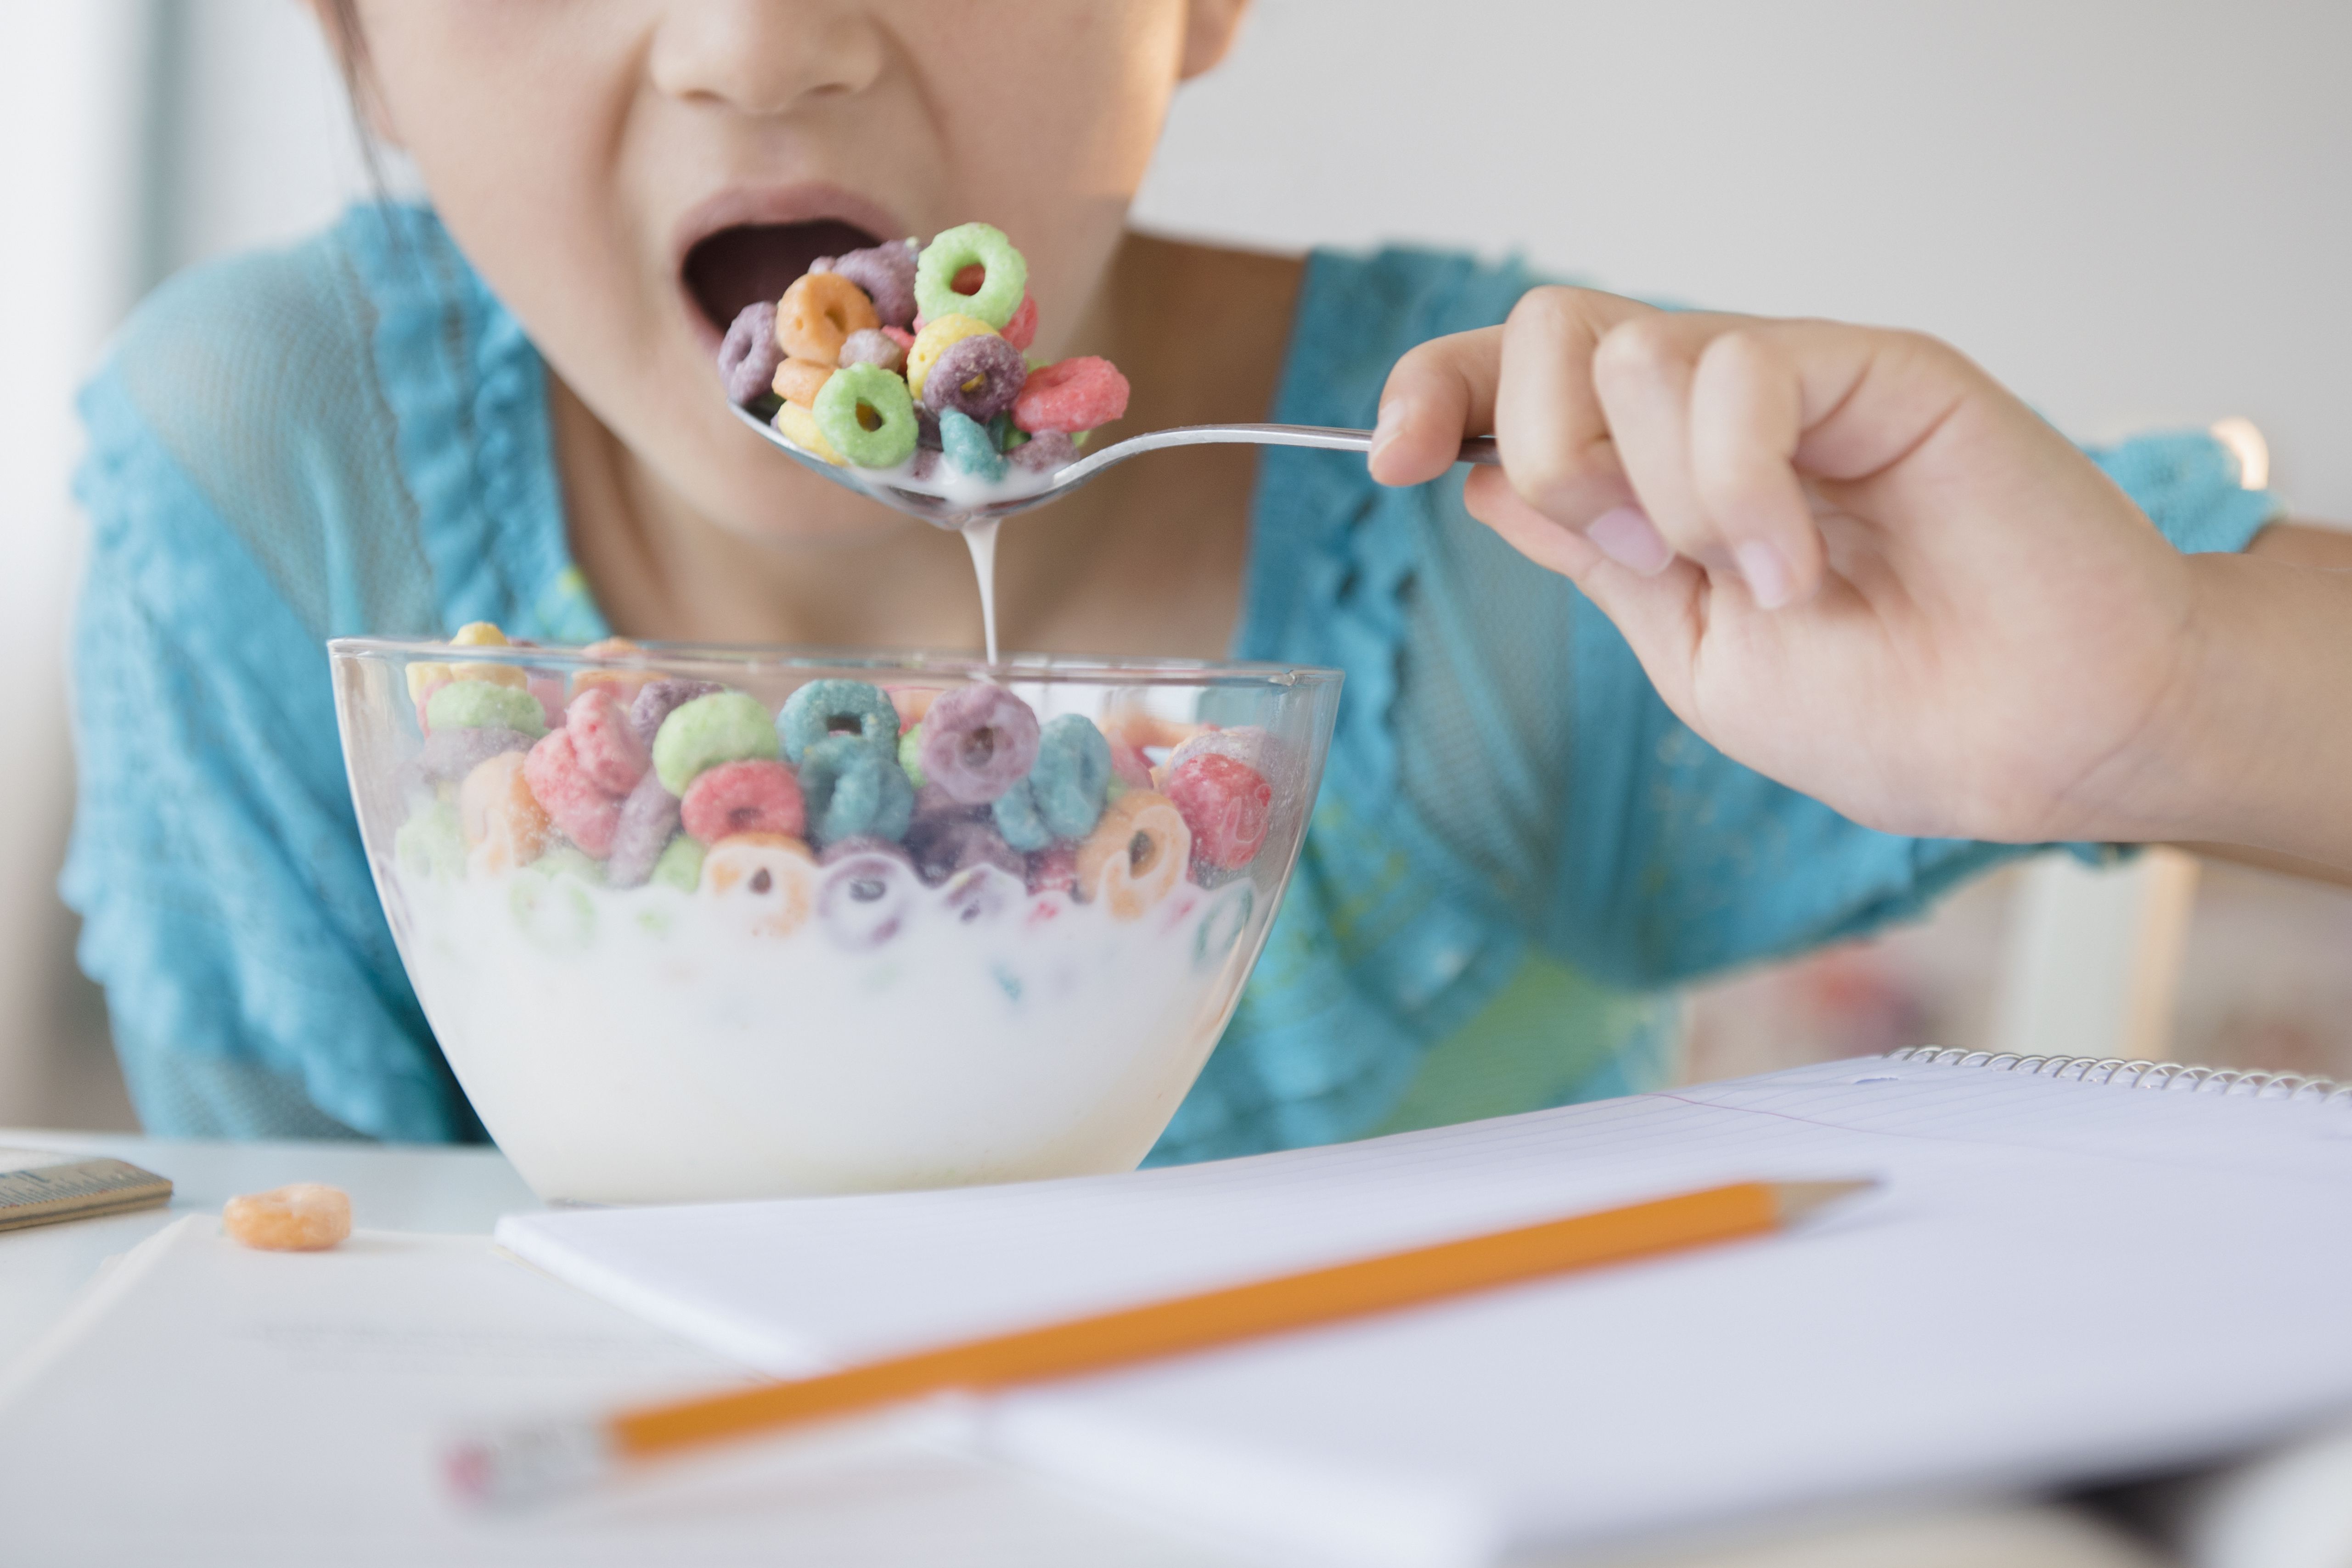 6 Unexpected Sources of Sugar in Your Kids’ Diet